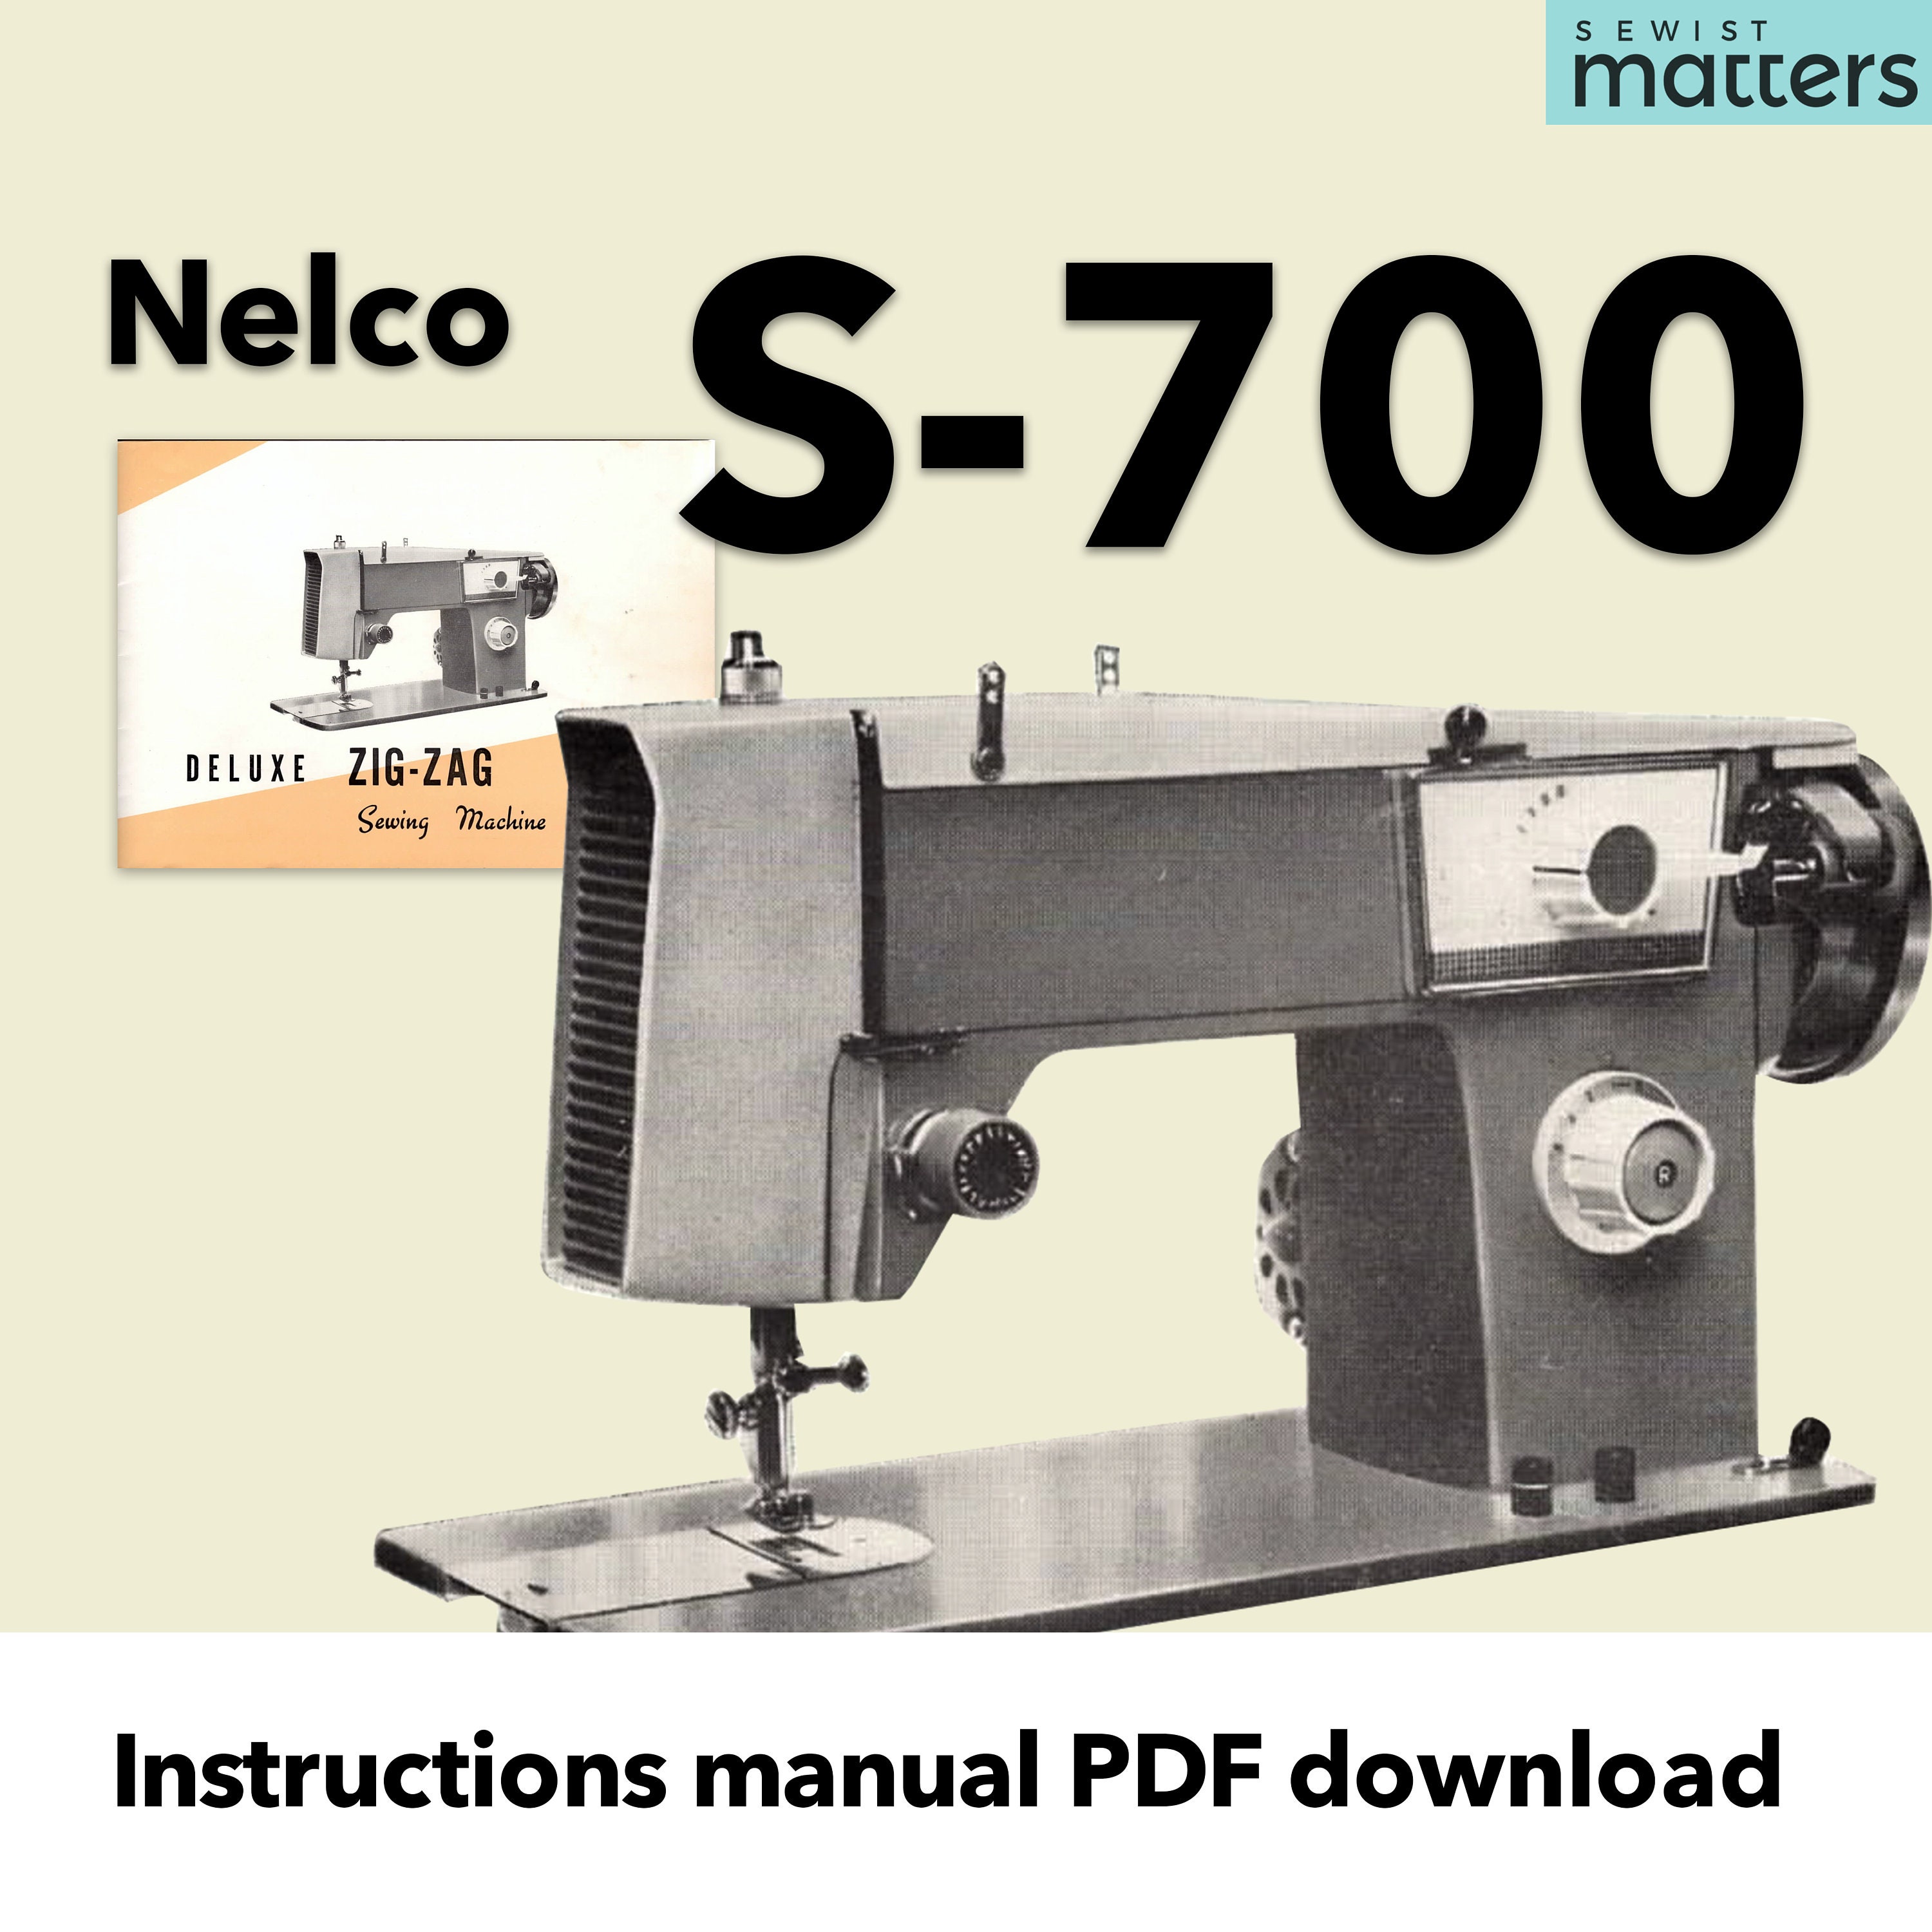 Nelco DE LUXE S-700 Zig-zag Sewing Machine Instruction Book Manual PDF  Download + Parts List